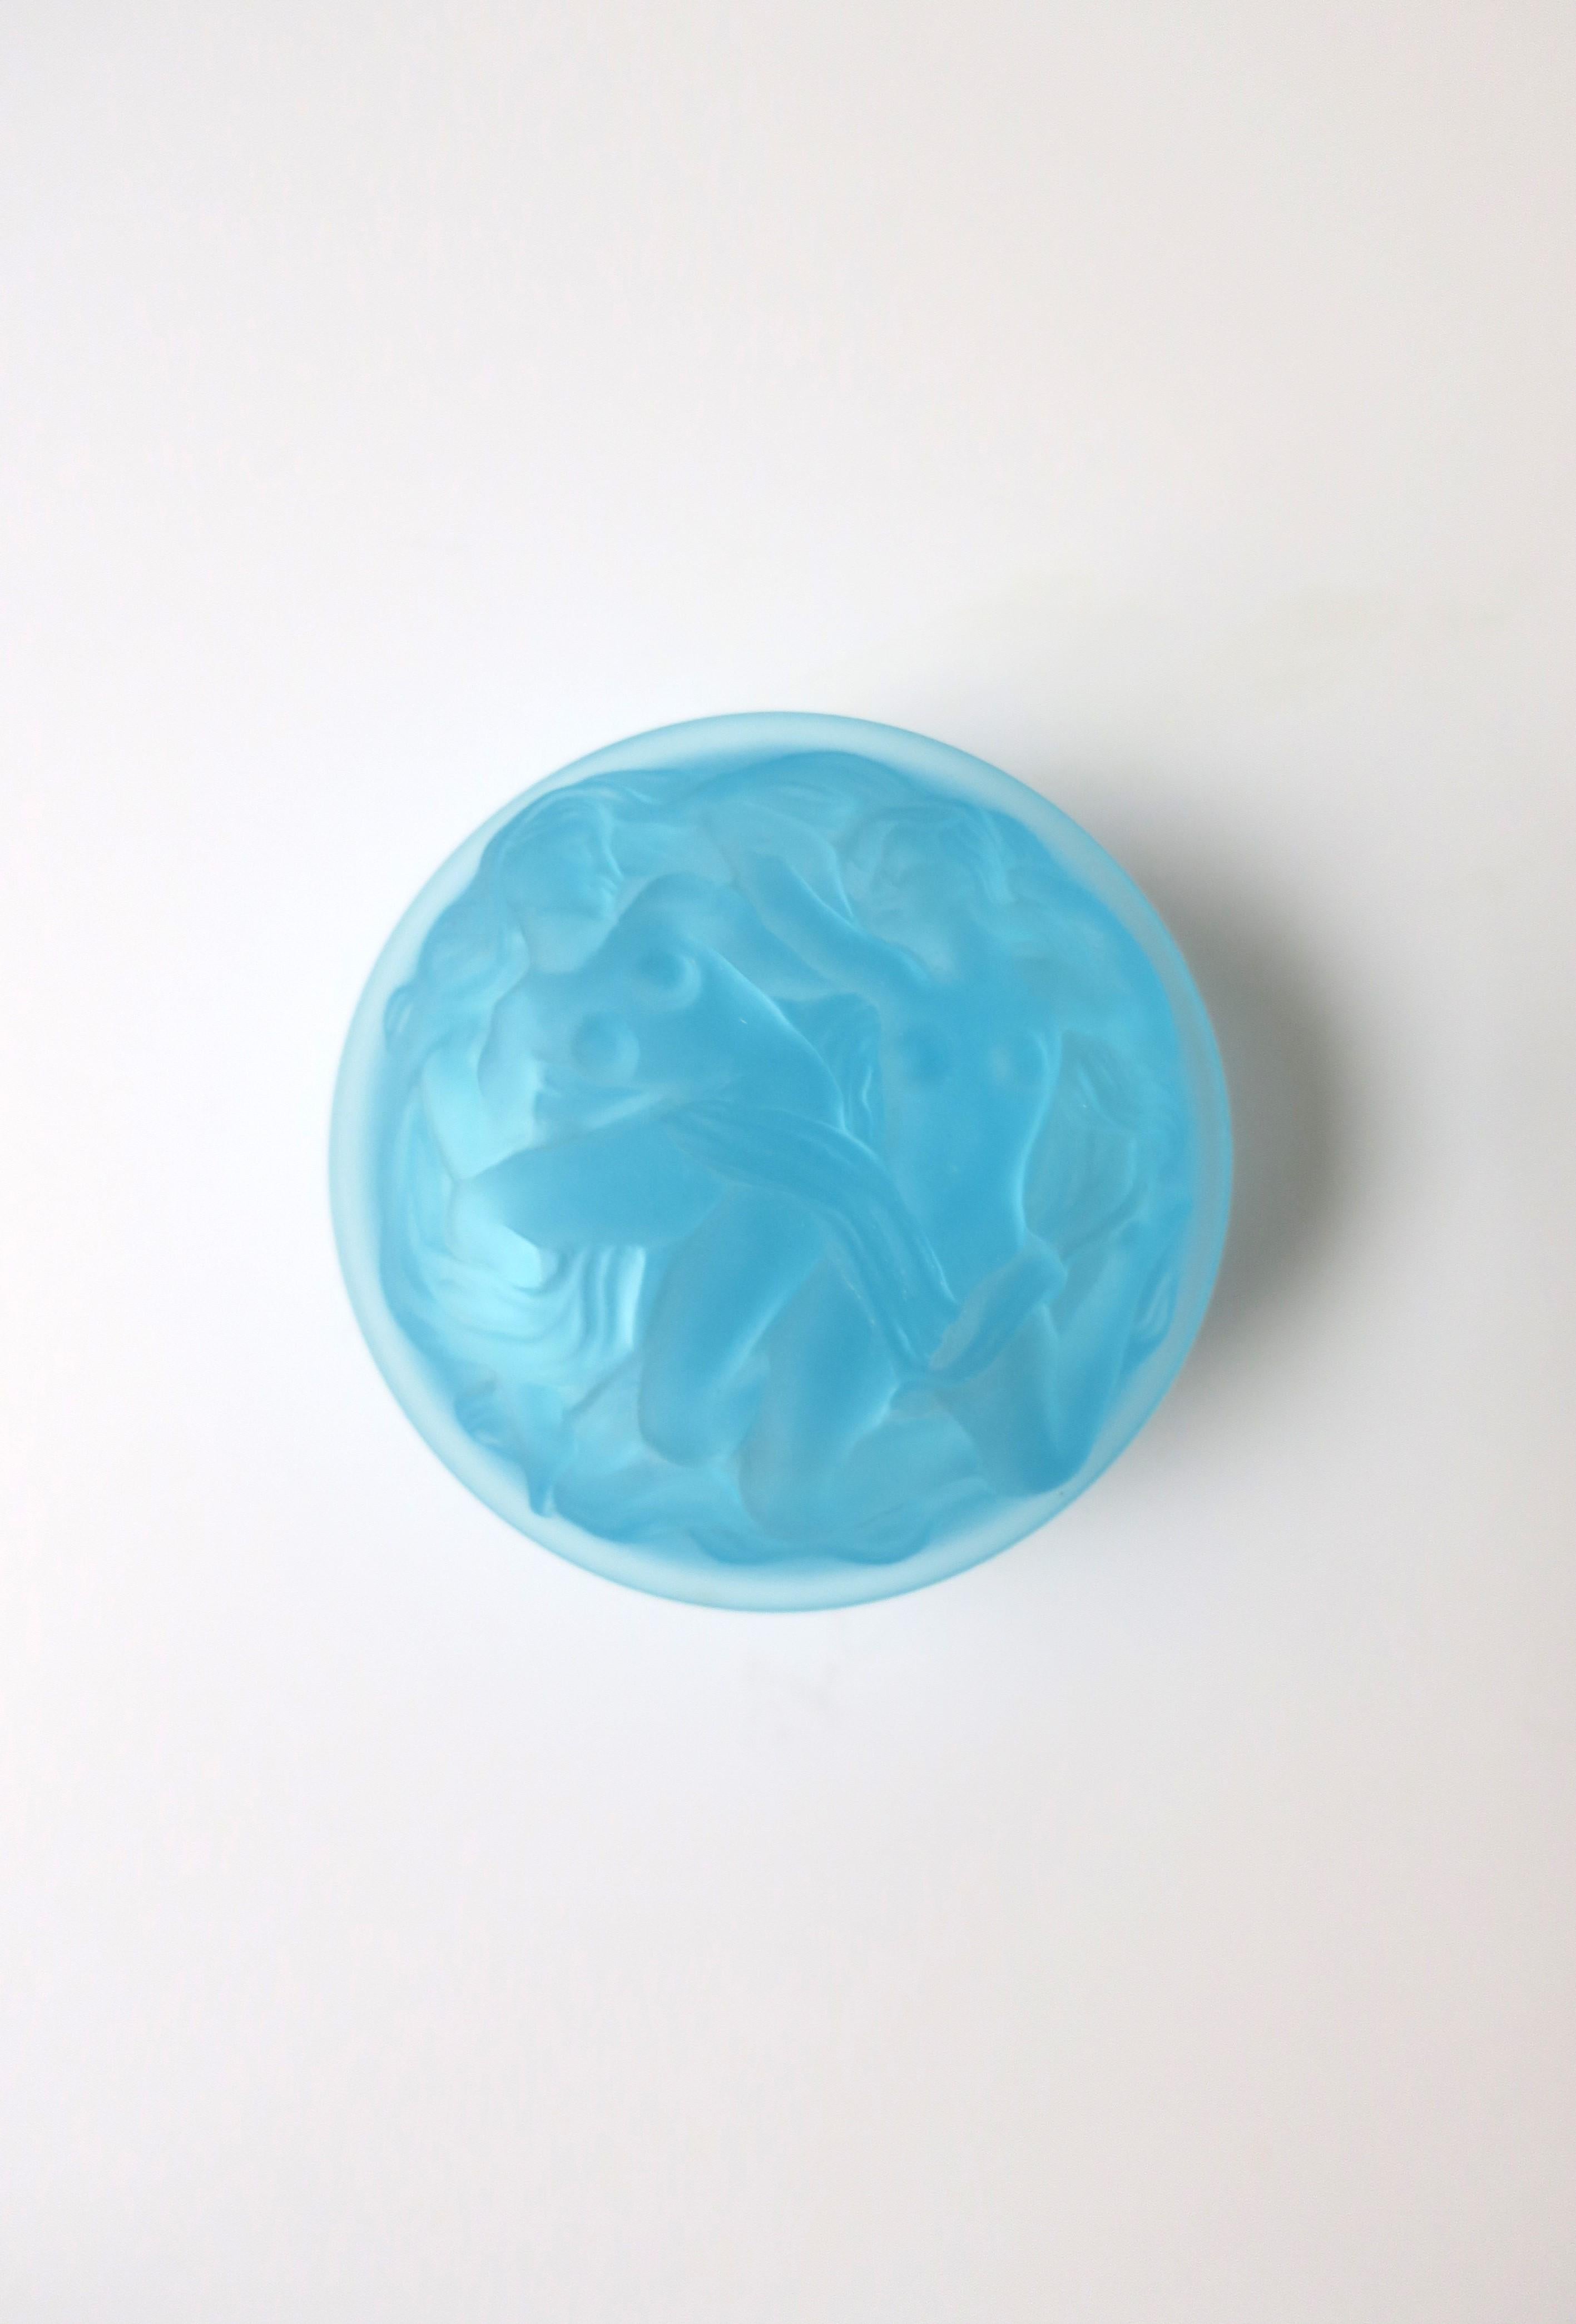 A beautiful sky-blue translucent Bohemian glass box with female relief in the Art Deco style, circa late-20th century, Czech Republic. This round box has a high relief of females on box lid and base circumference. A beautiful box to hold small items